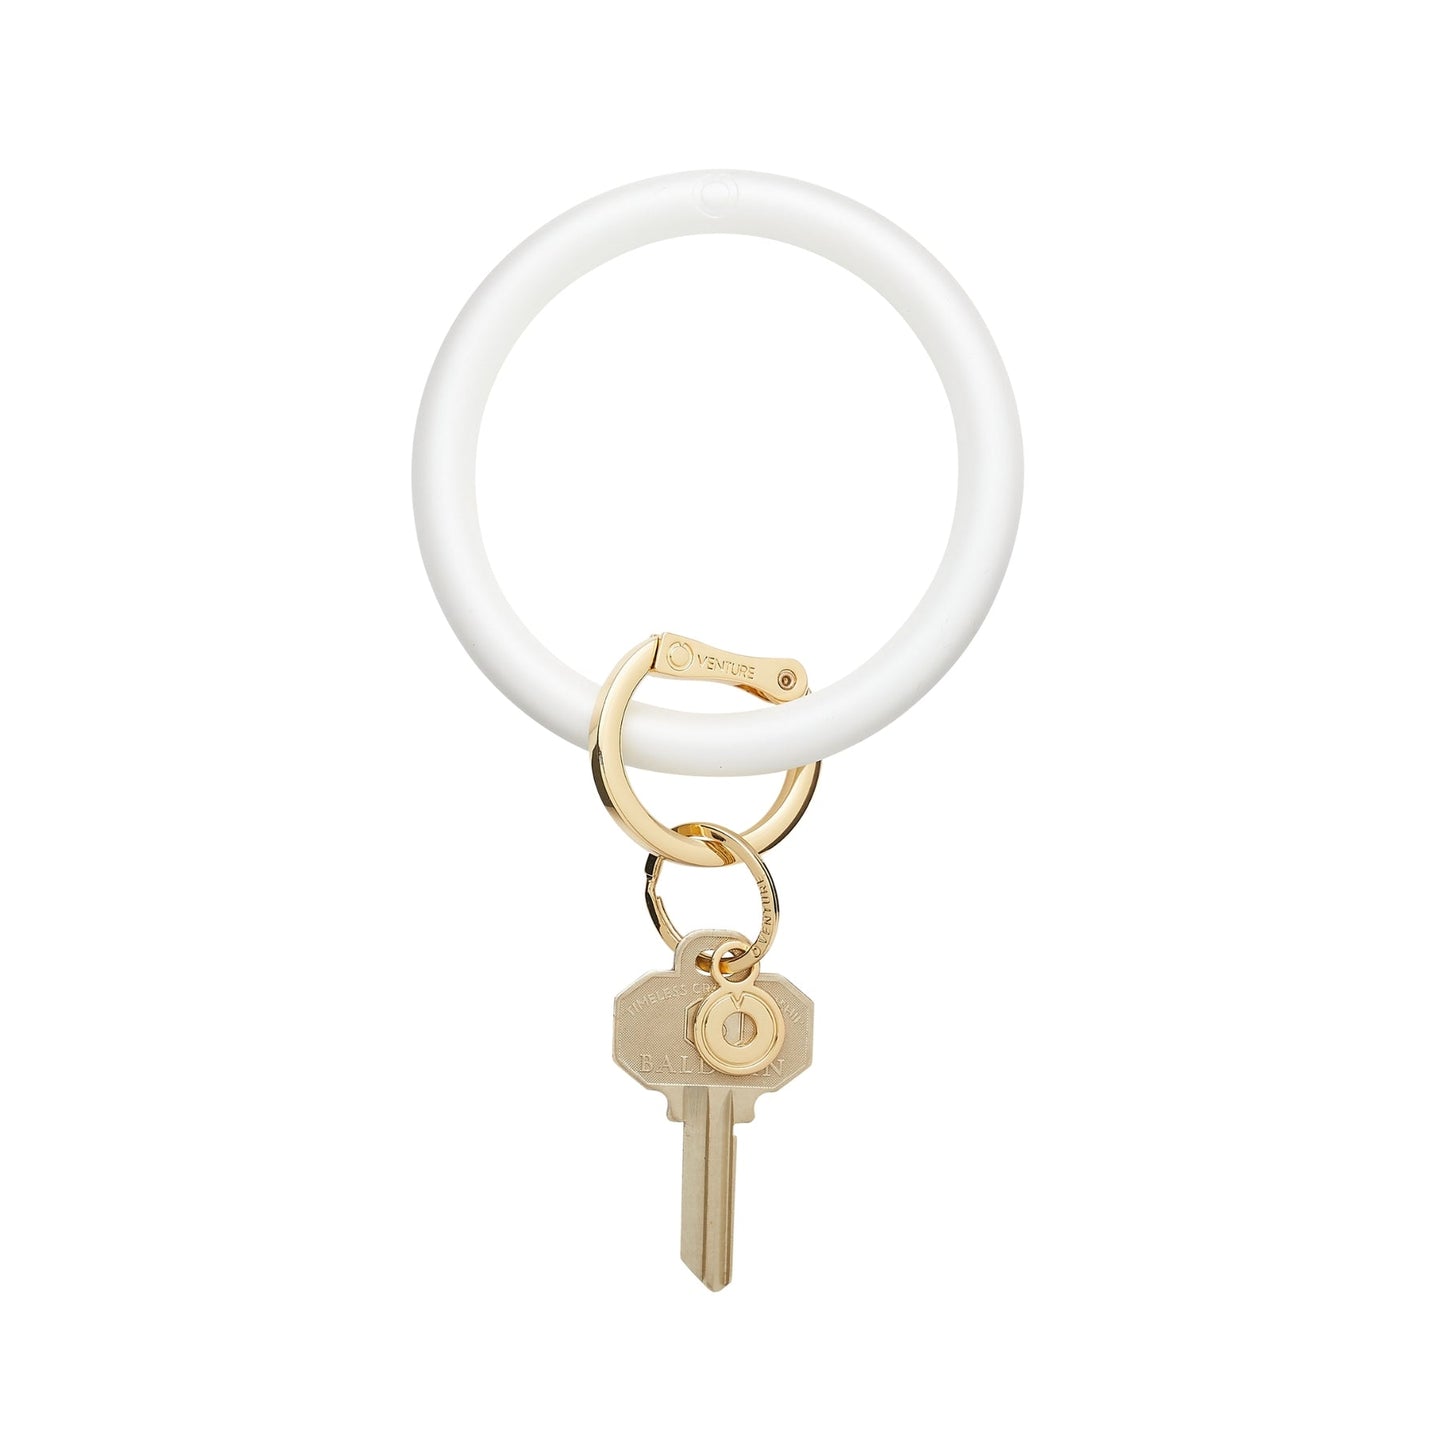 O-Venture Silicone Pearlized Key Ring